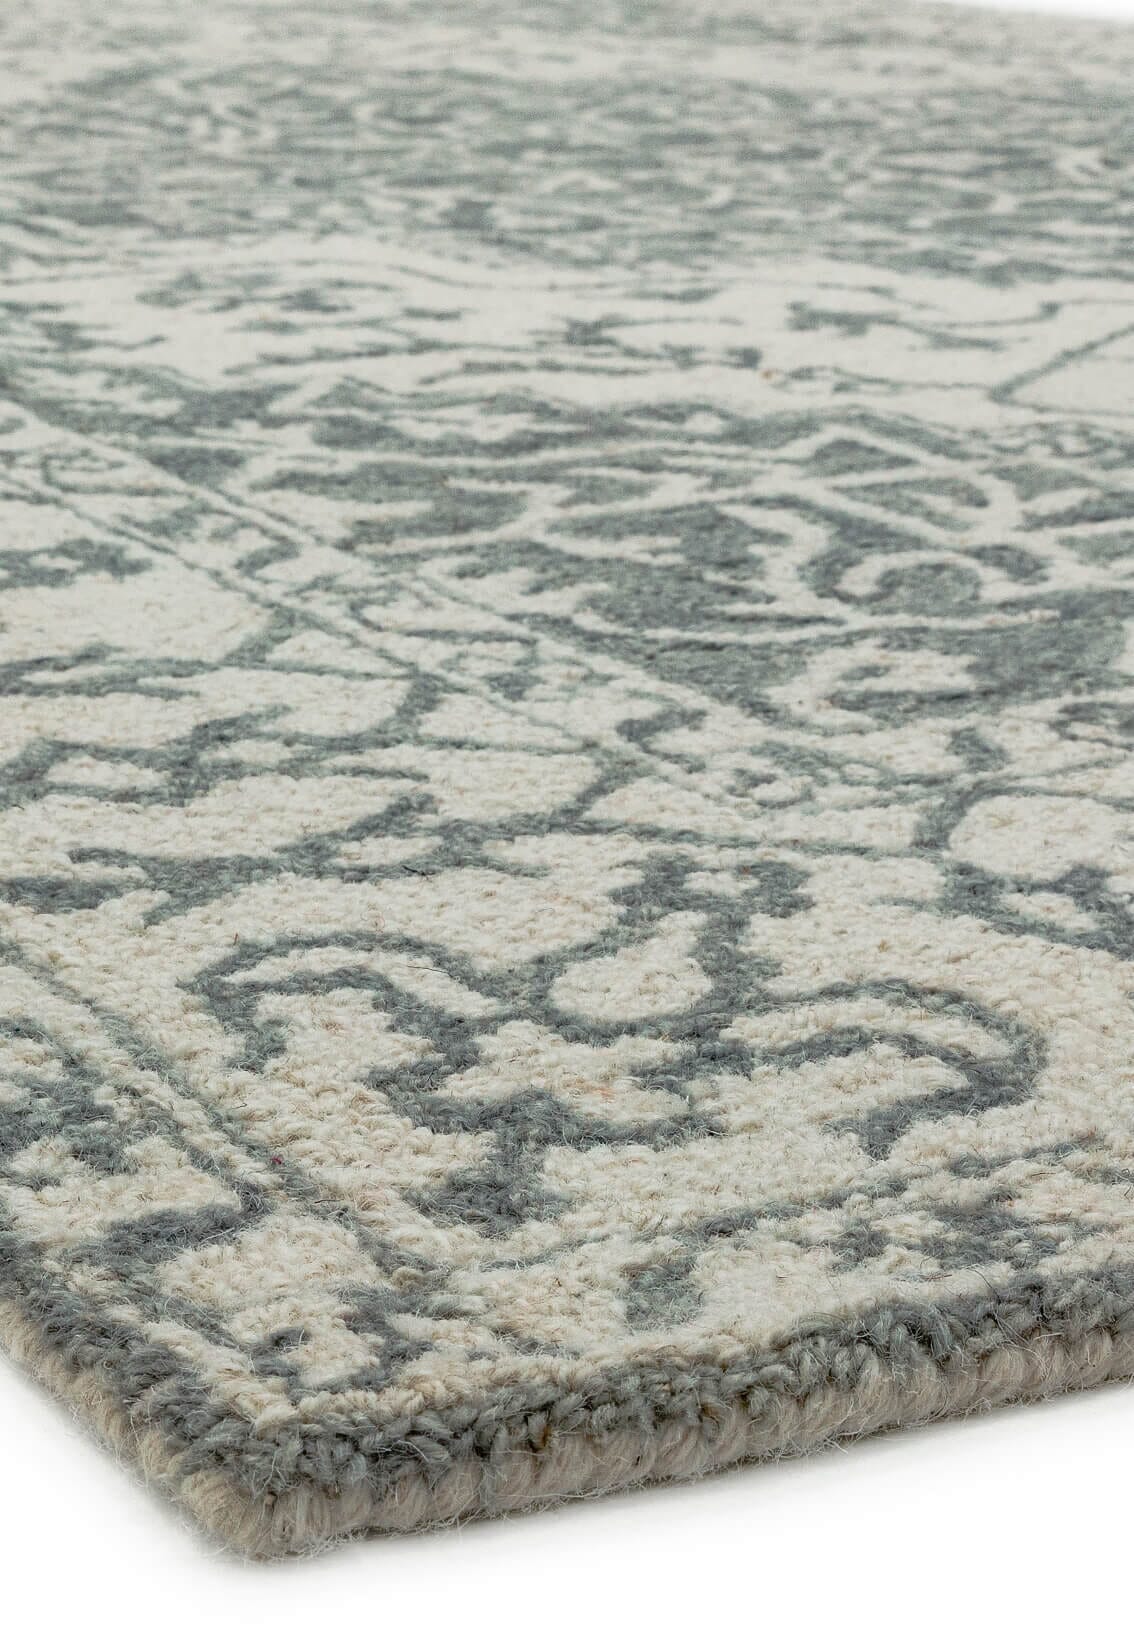  Asiatic Carpets-Asiatic Carpets Bronte Fine Loop Hand Tufted Rug Silver Grey - 200 x 290cm-Beige, Natural 981 